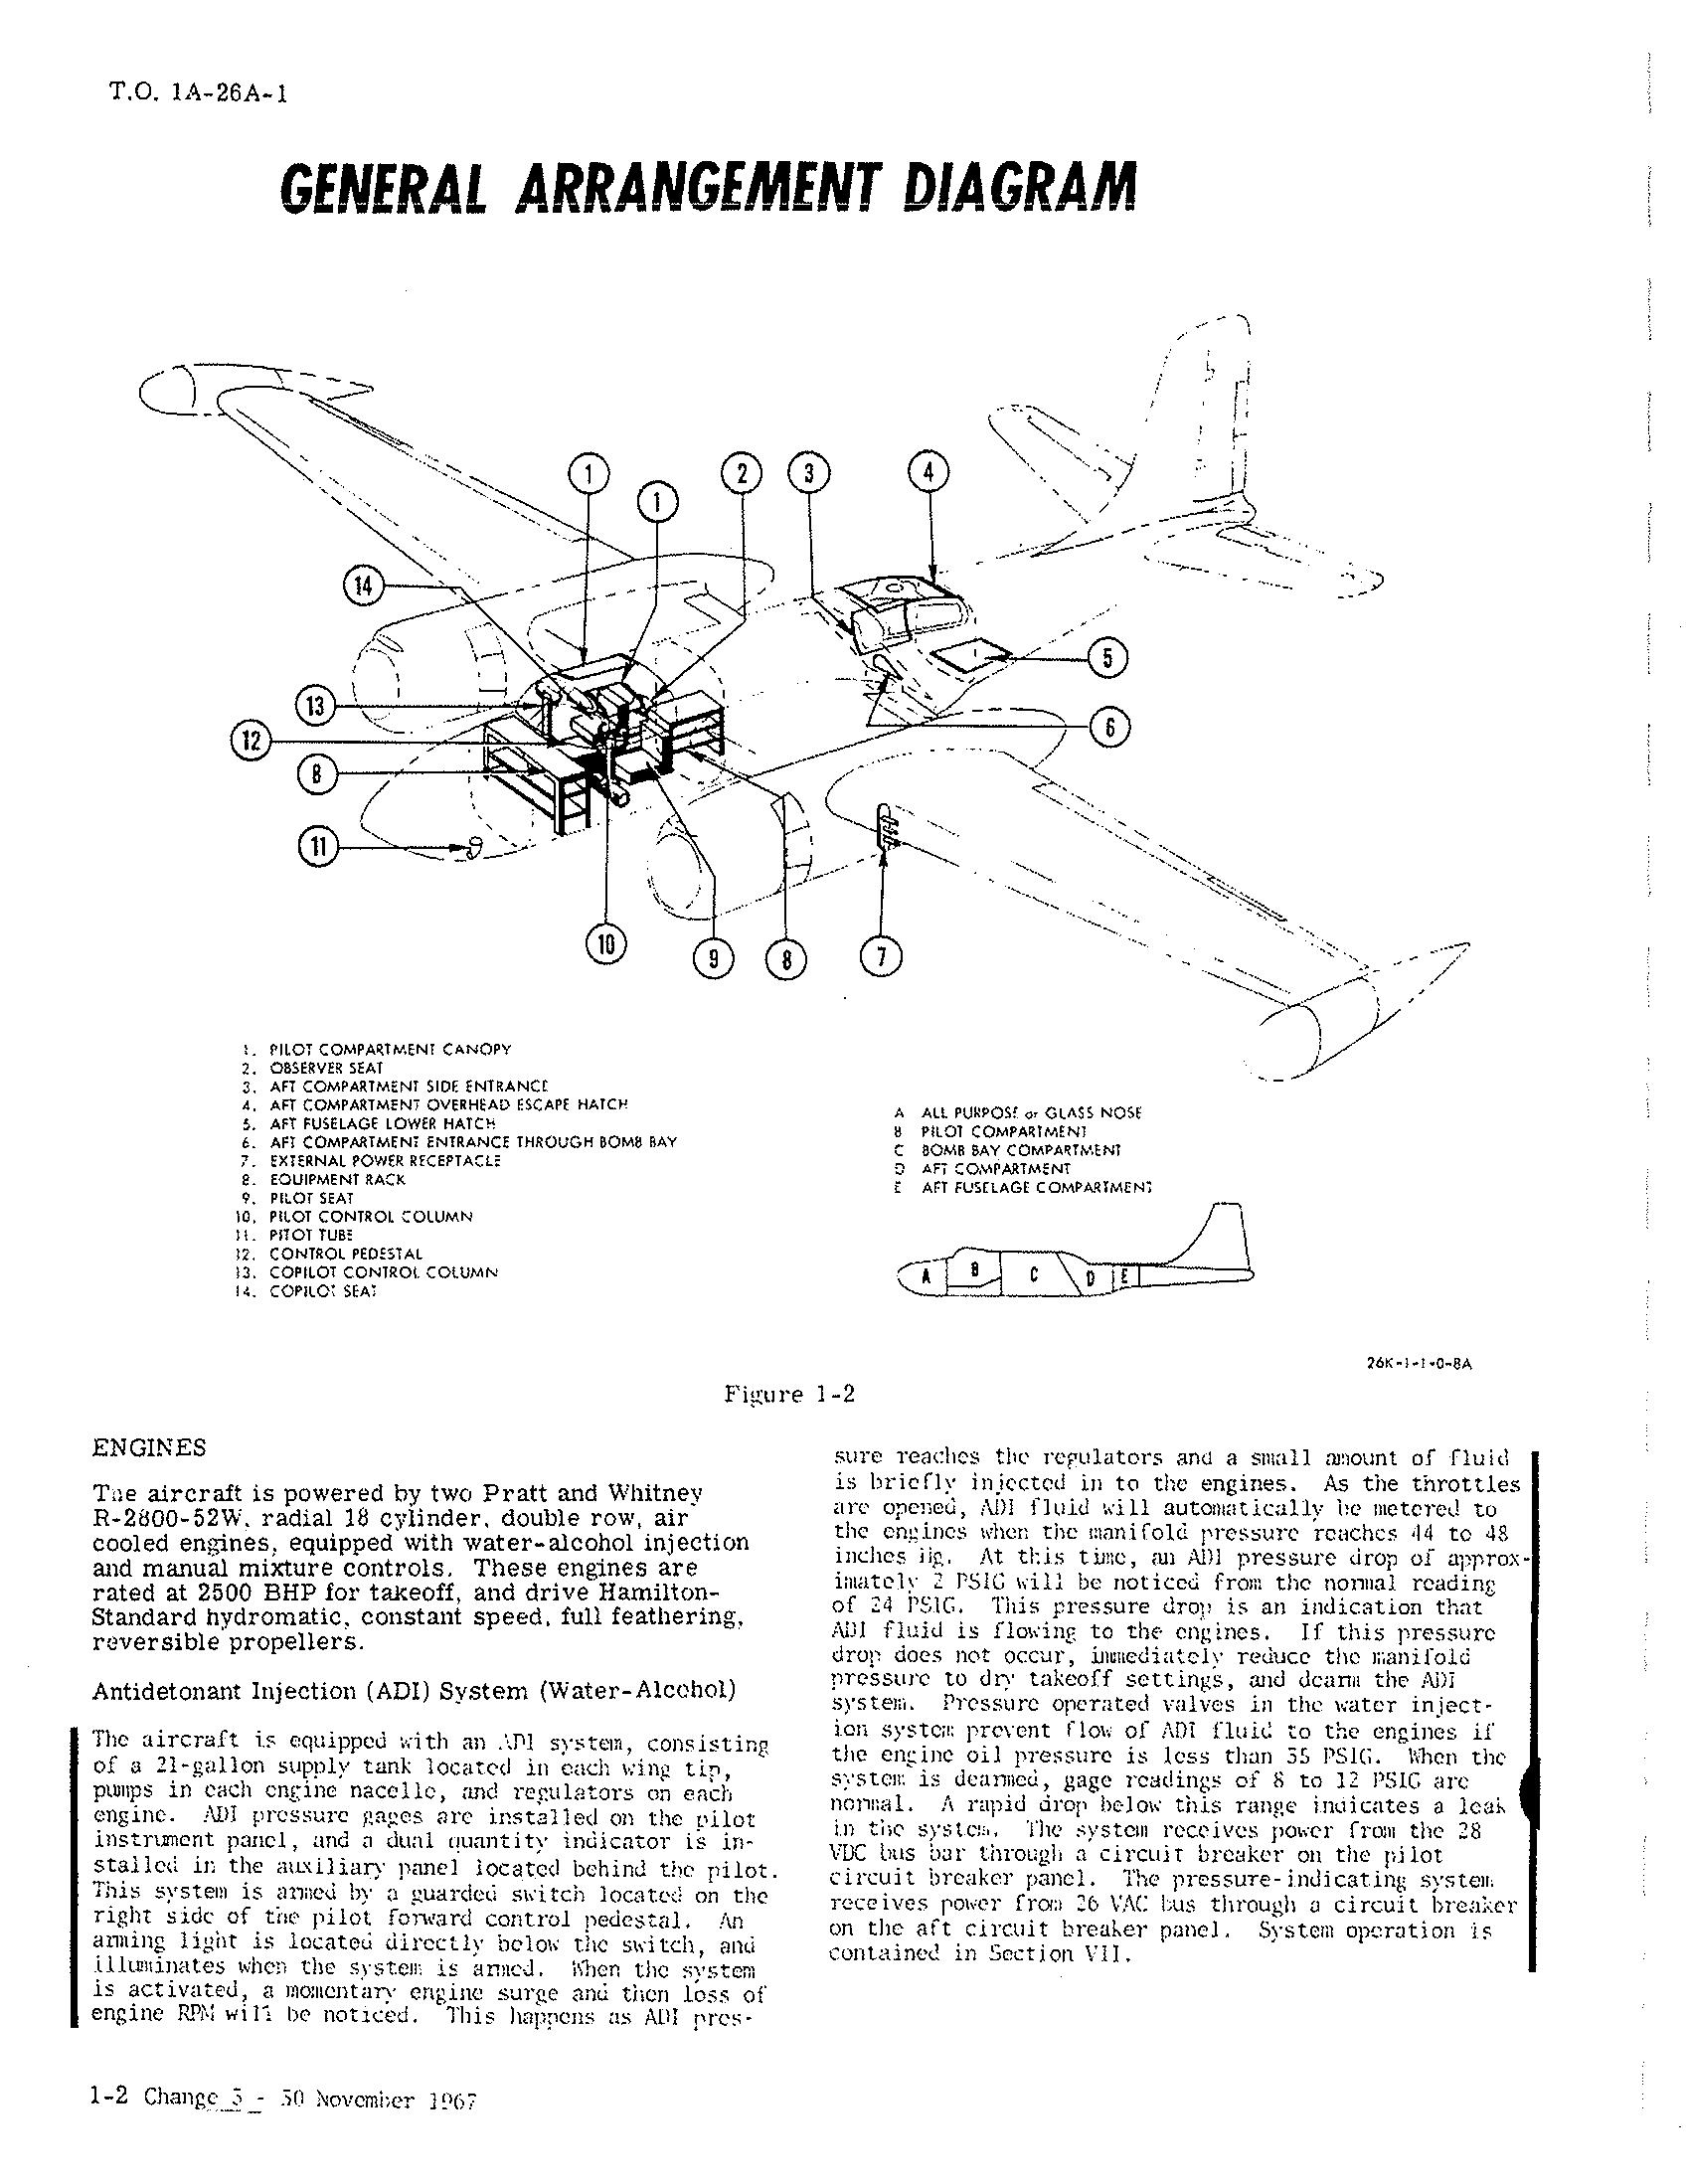 Sample page 10 from AirCorps Library document: Flight Manual for USAF Series A-26A Aircraft